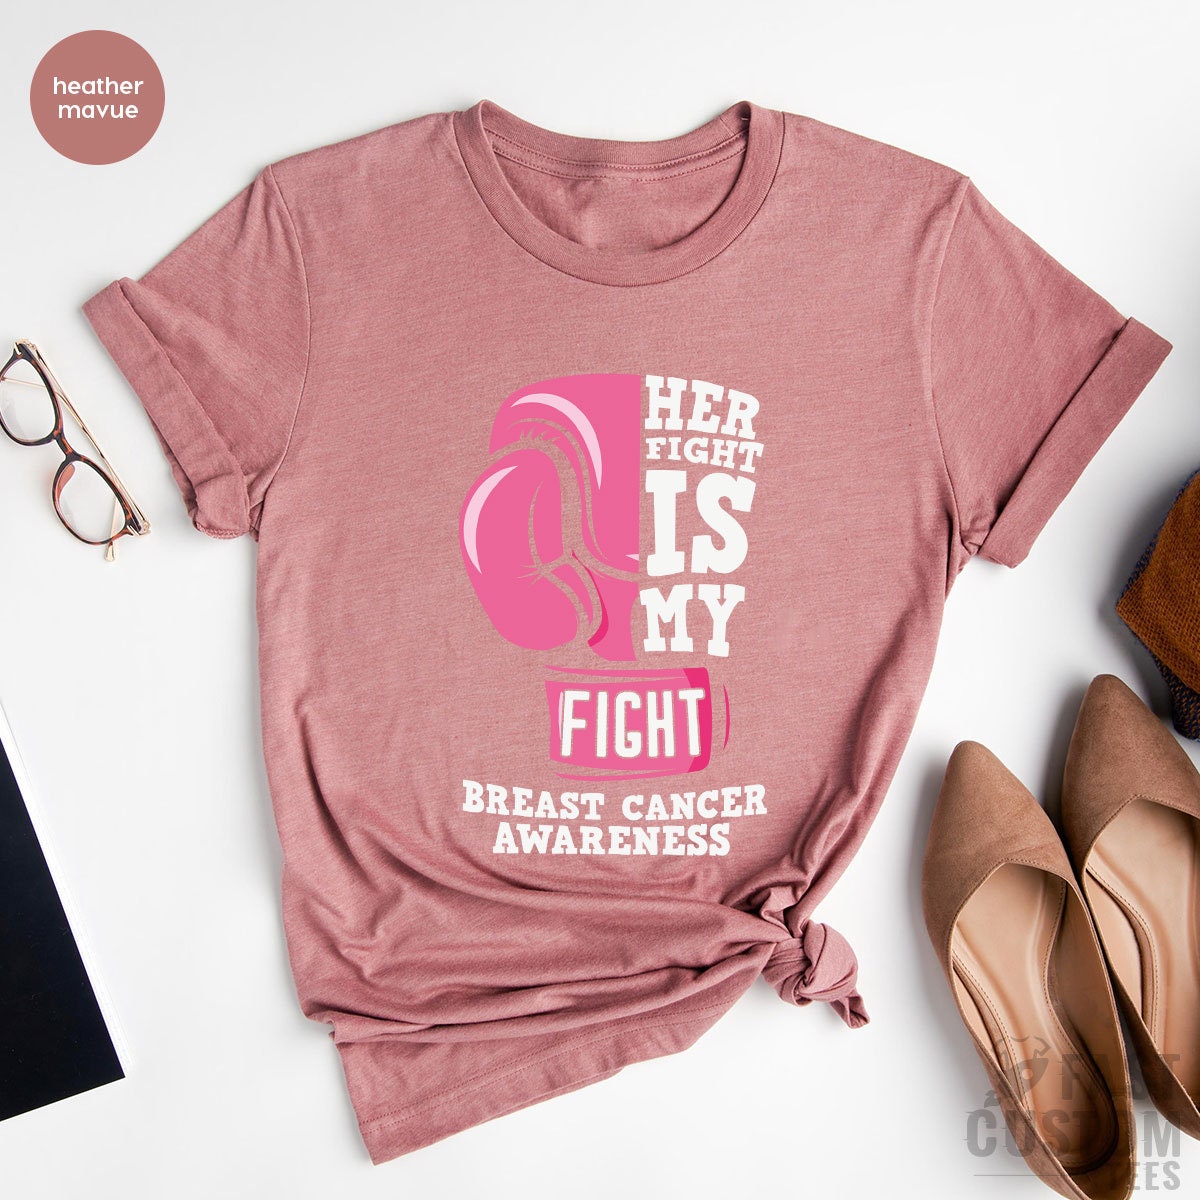 Cancer Support Shirt, Cancer Awareness T-Shirt, Her Fight Is Our Fight Shirt, Motivational T Shirt, Cancer Ribbon Tee,Breast Cancer Shirt - Fastdeliverytees.com